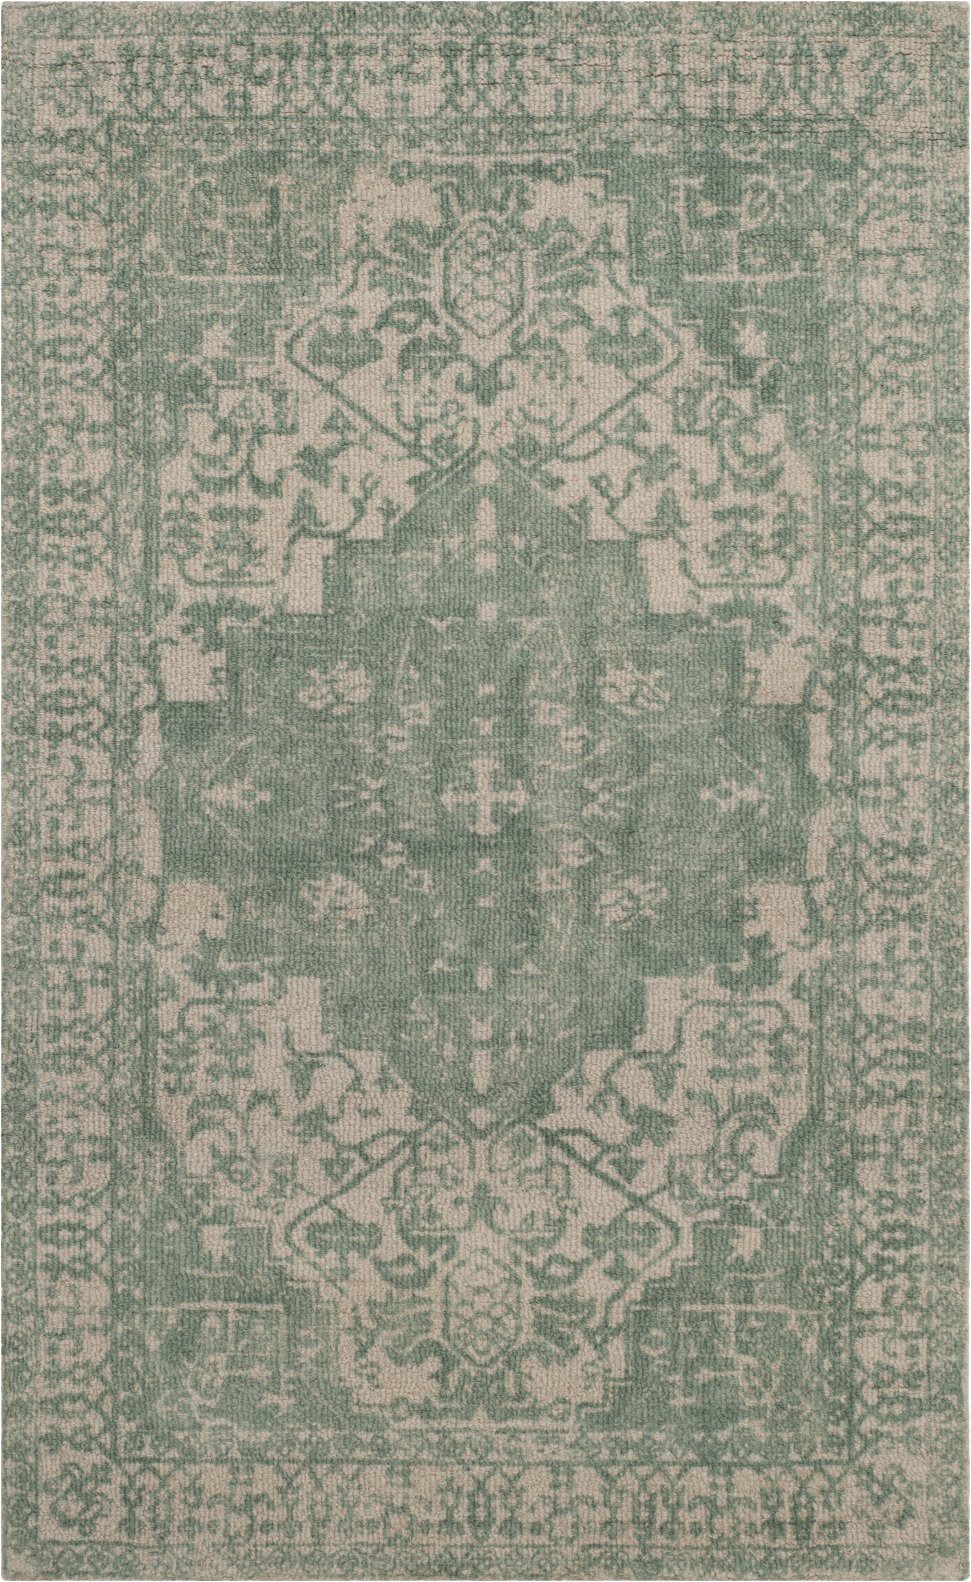 Mint Green and Brown area Rug Safavieh Rvt Restoration Vintage Restoration 421 Mint Ivory area Rug